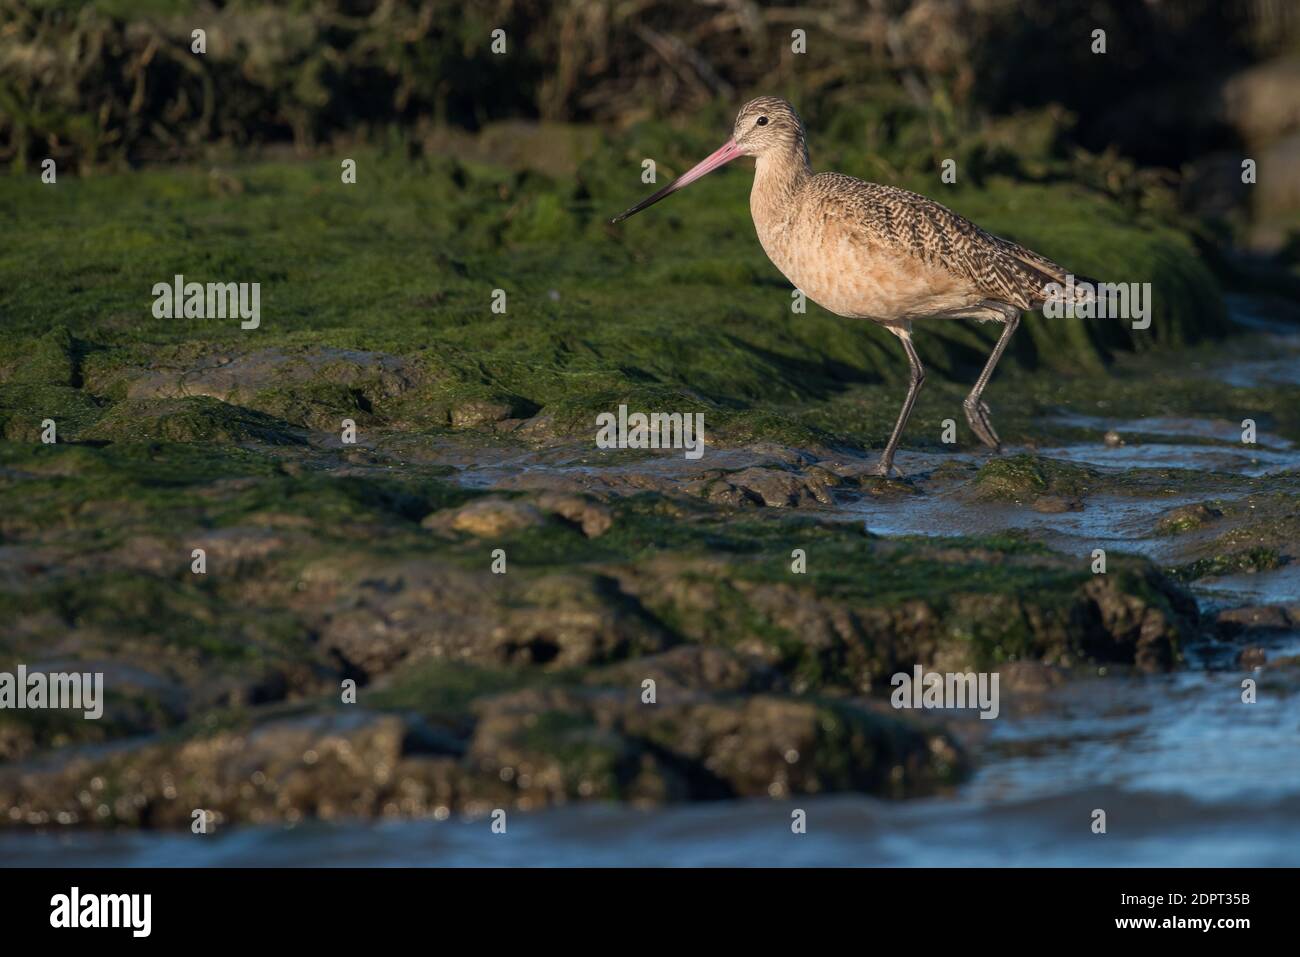 A marbled godwit (Limosa fedoa), a shorebird foraging along a mudflat in Moss landing state wildlife area in Monterey County, California Stock Photo